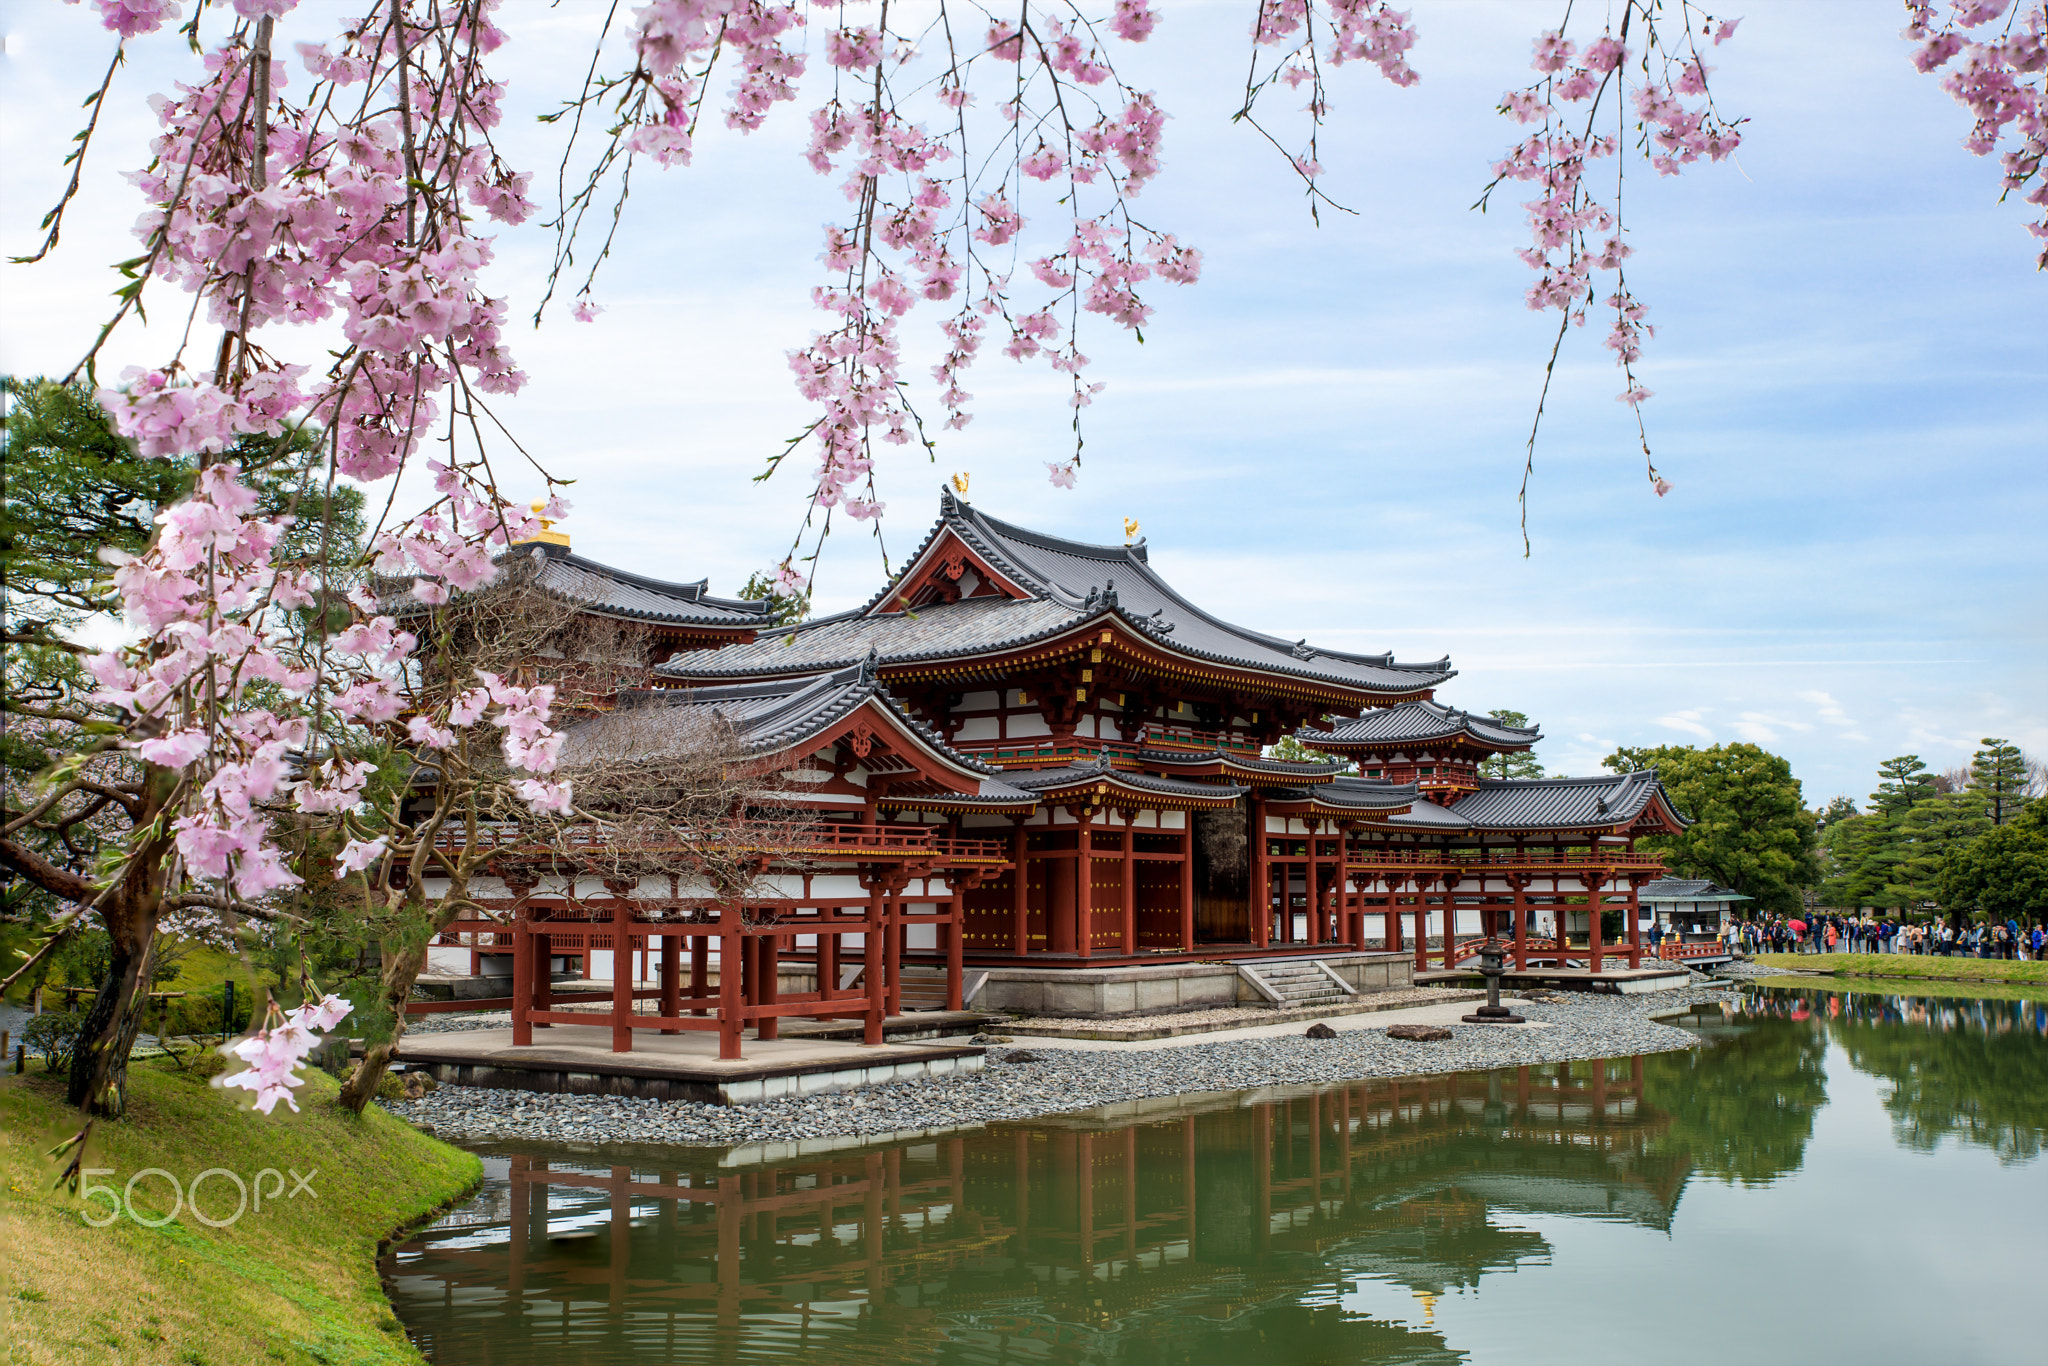 Byodo-in Temple in Uji, Kyoto, Japan during spring. Cherry bloss